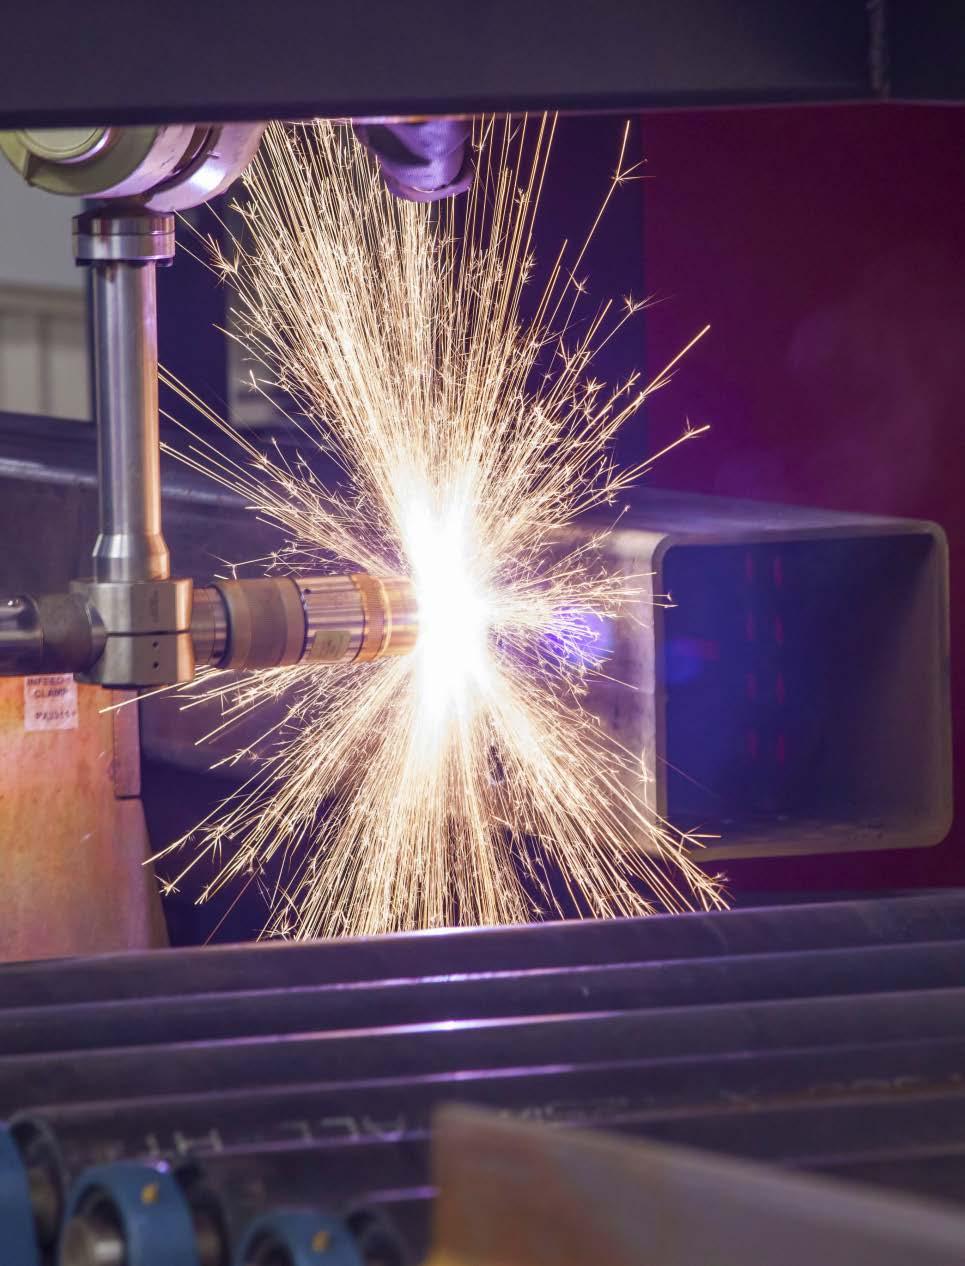 0hp High Definition Plasma technology aligns and focuses the plasma arc, improving arc stability and energy for more powerful precision cutting.